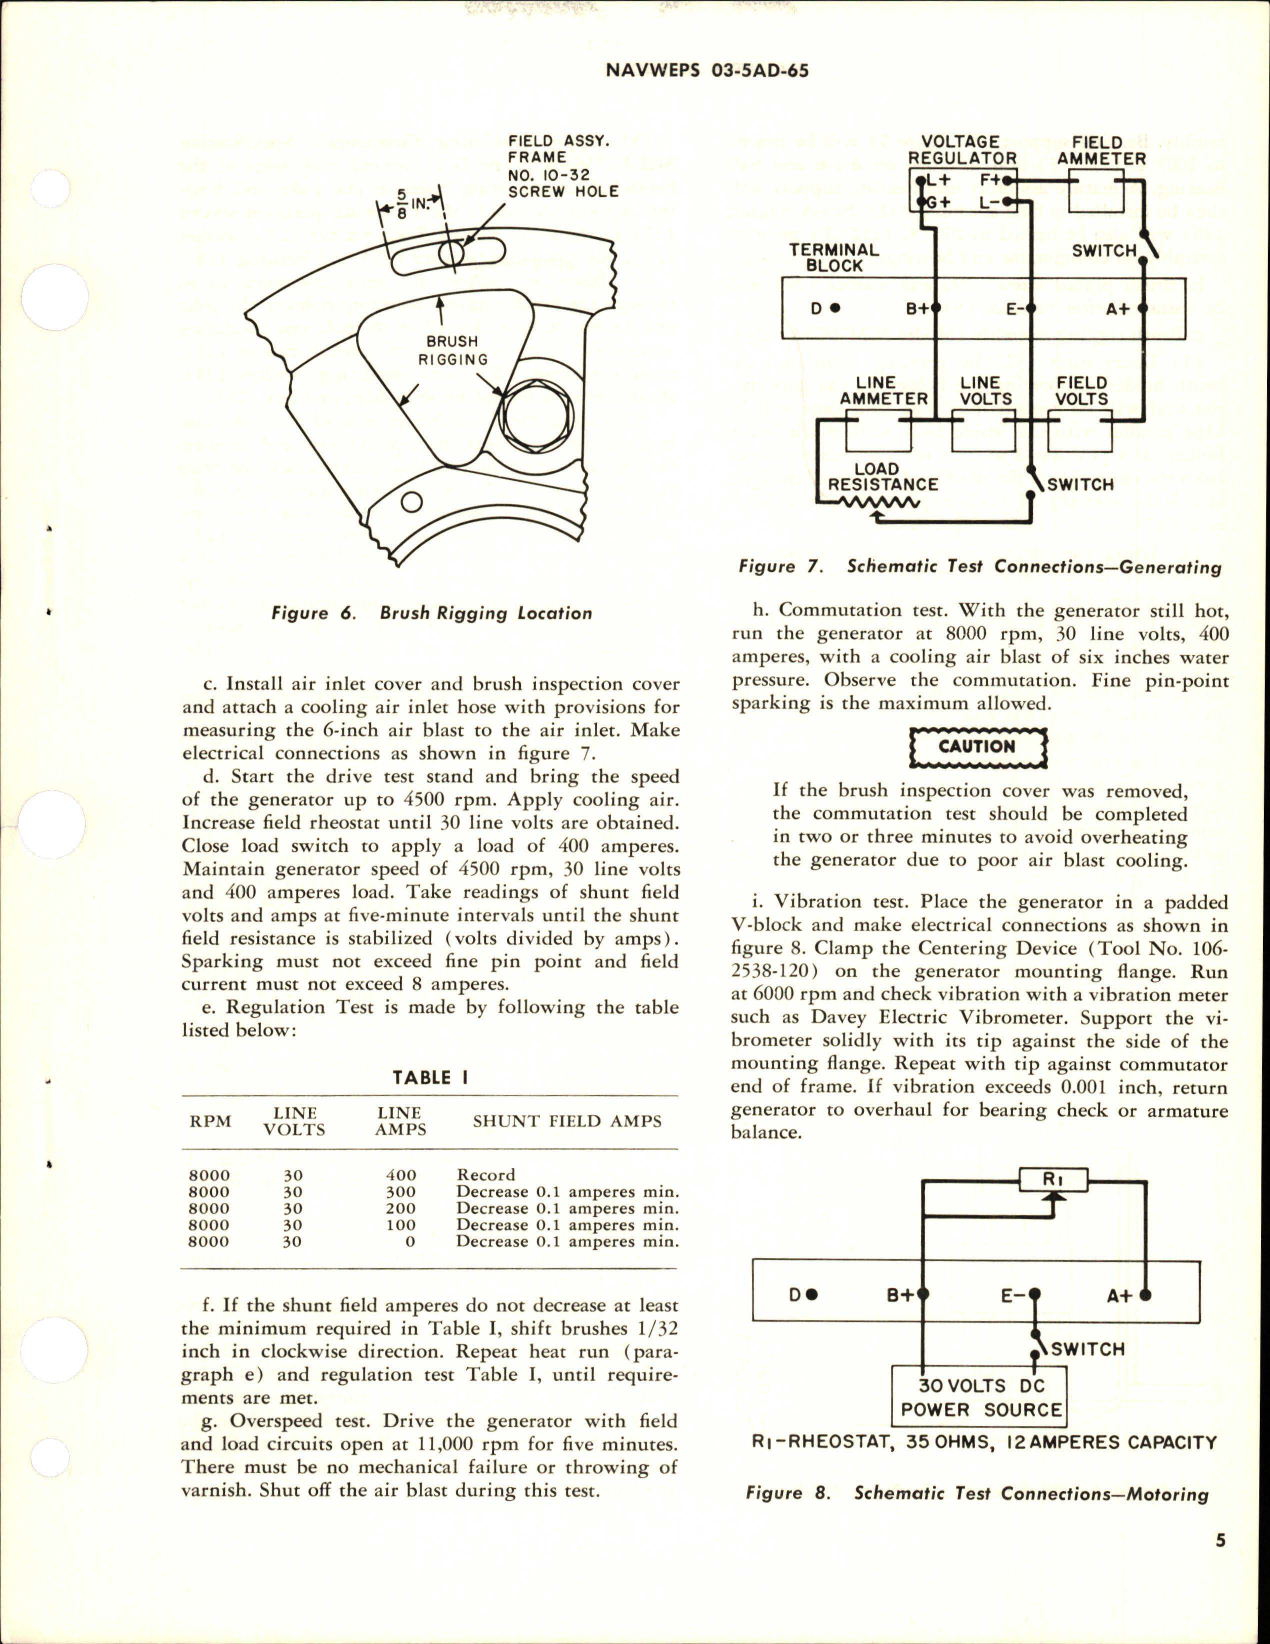 Sample page 5 from AirCorps Library document: Overhaul Instructions with Parts Breakdown for D-C Generators - Models 2CM76C3, and 2CM76C3A